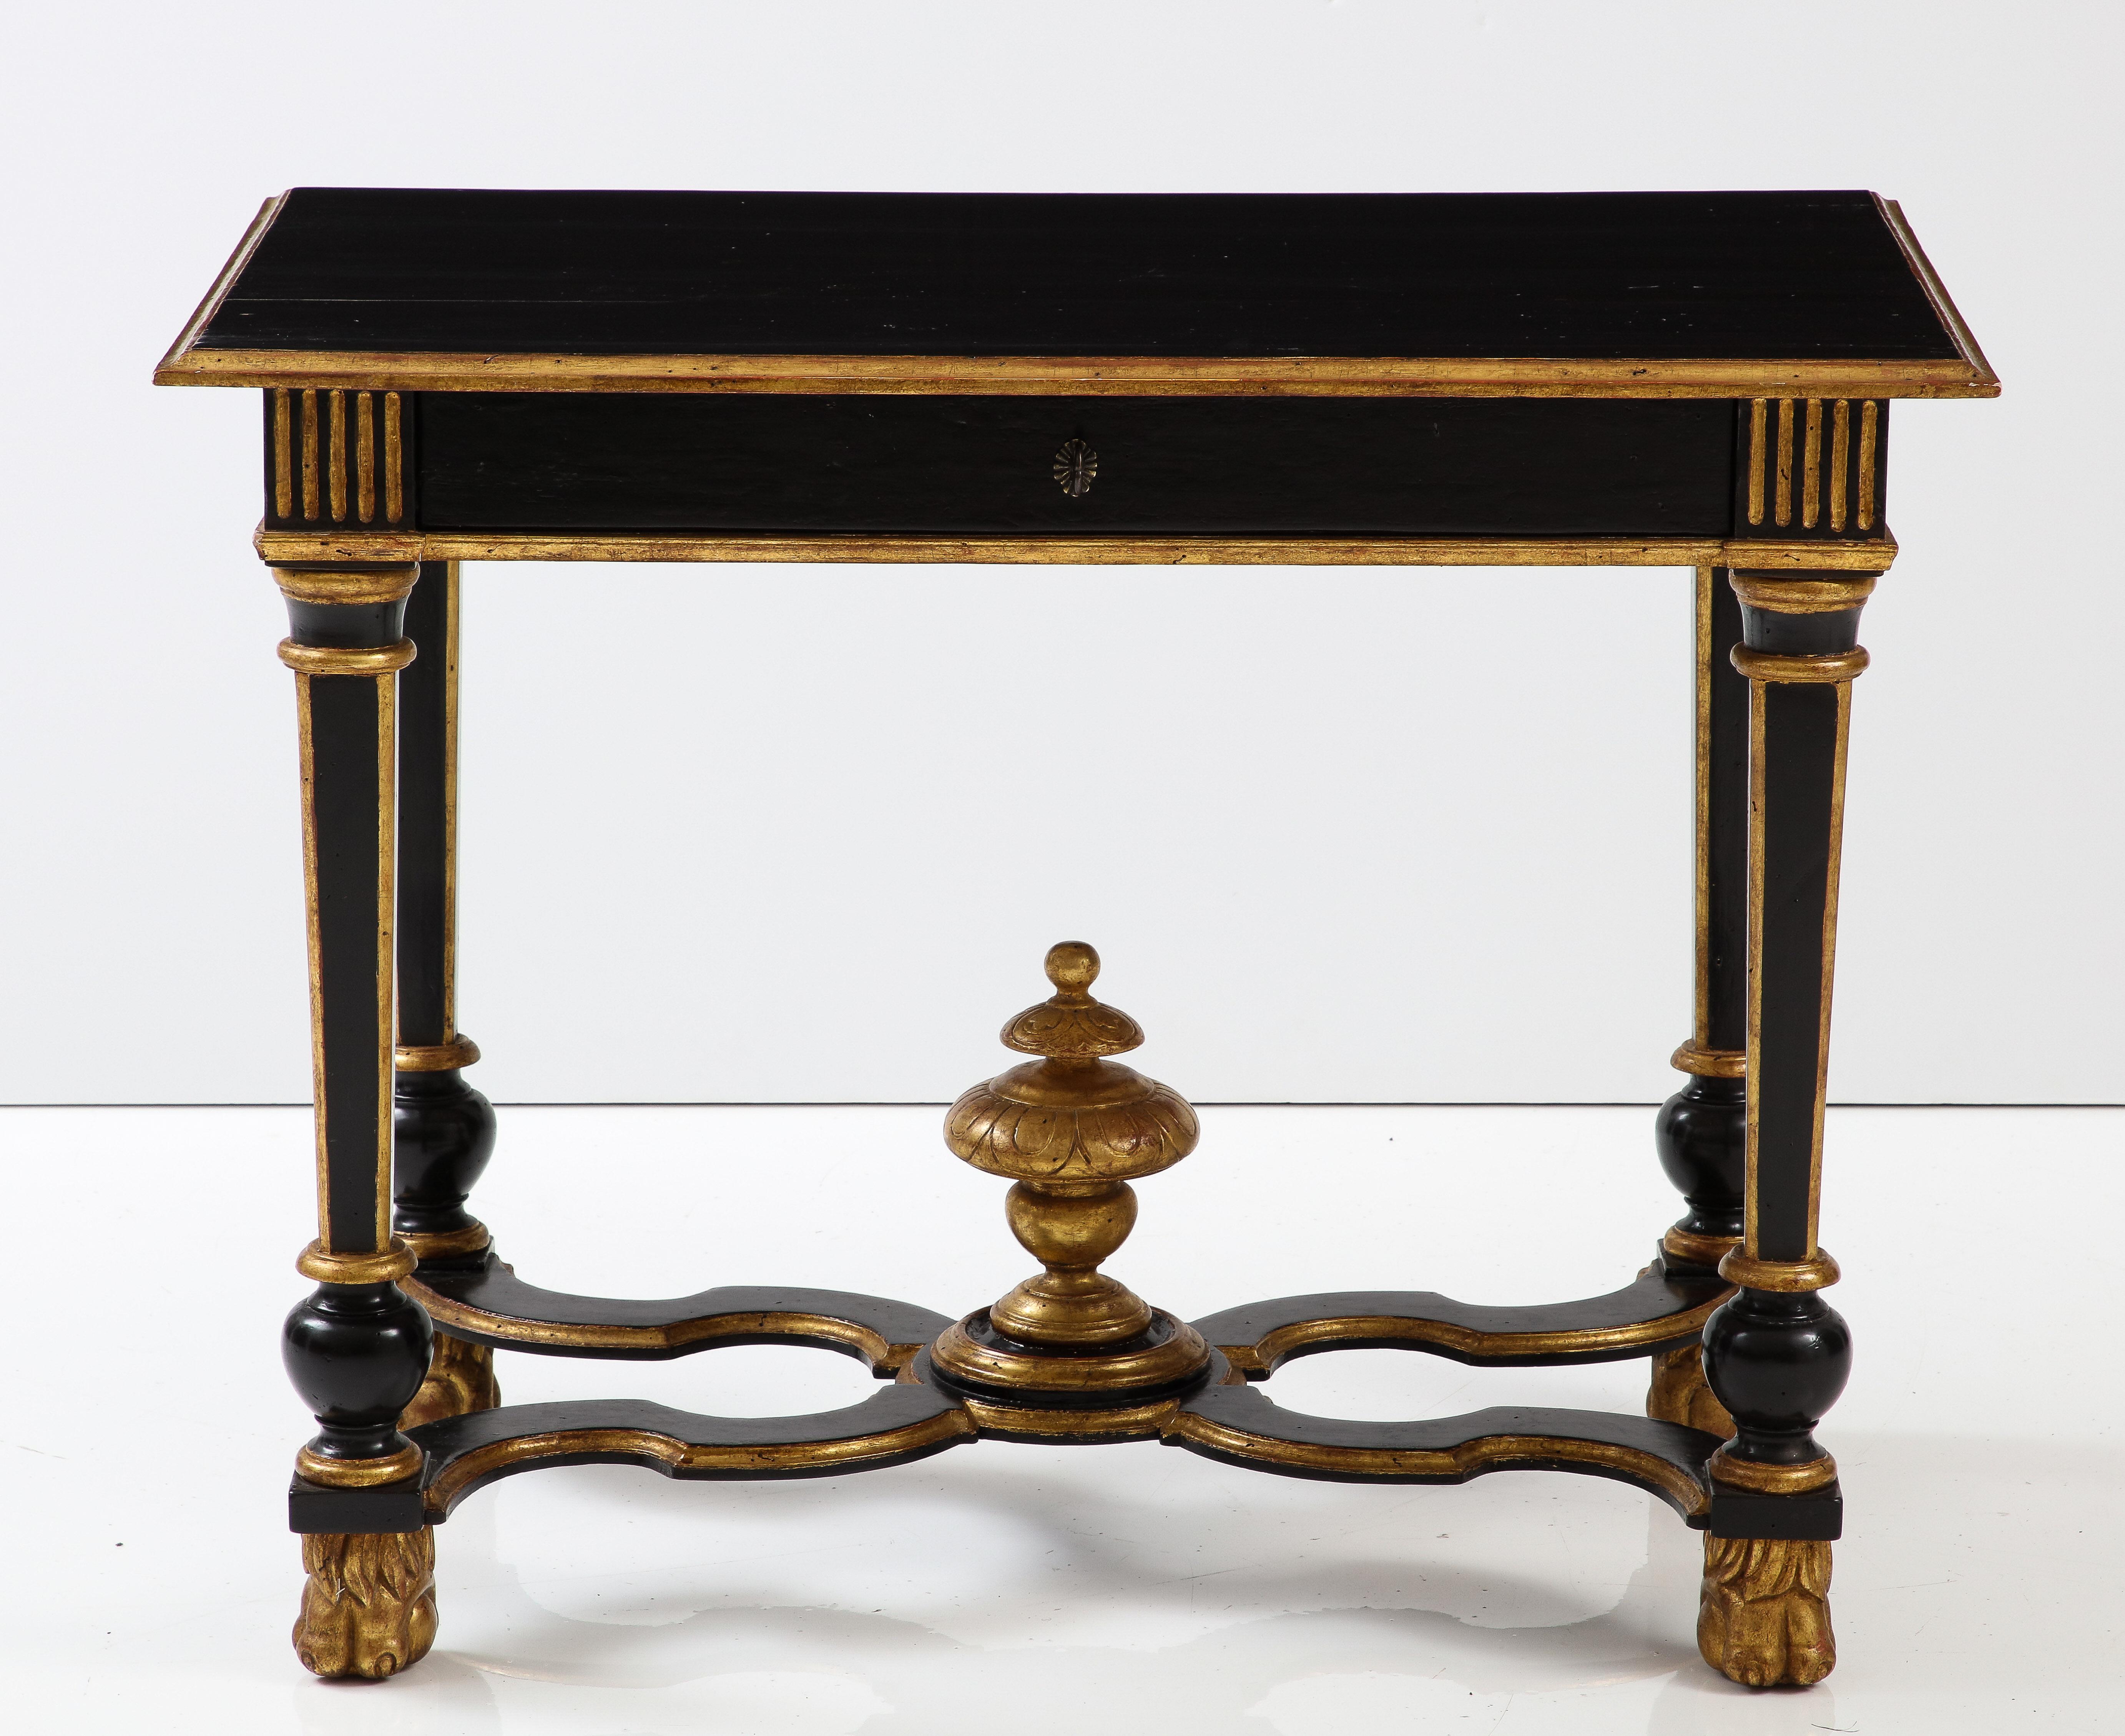 An elegant table that would make a statement in any room. Lacquered black with giltwood accents, the table features a molded top with reeded corners on the apron and is raised on turned, tapered legs with clawed feet. The piece de resistance is the